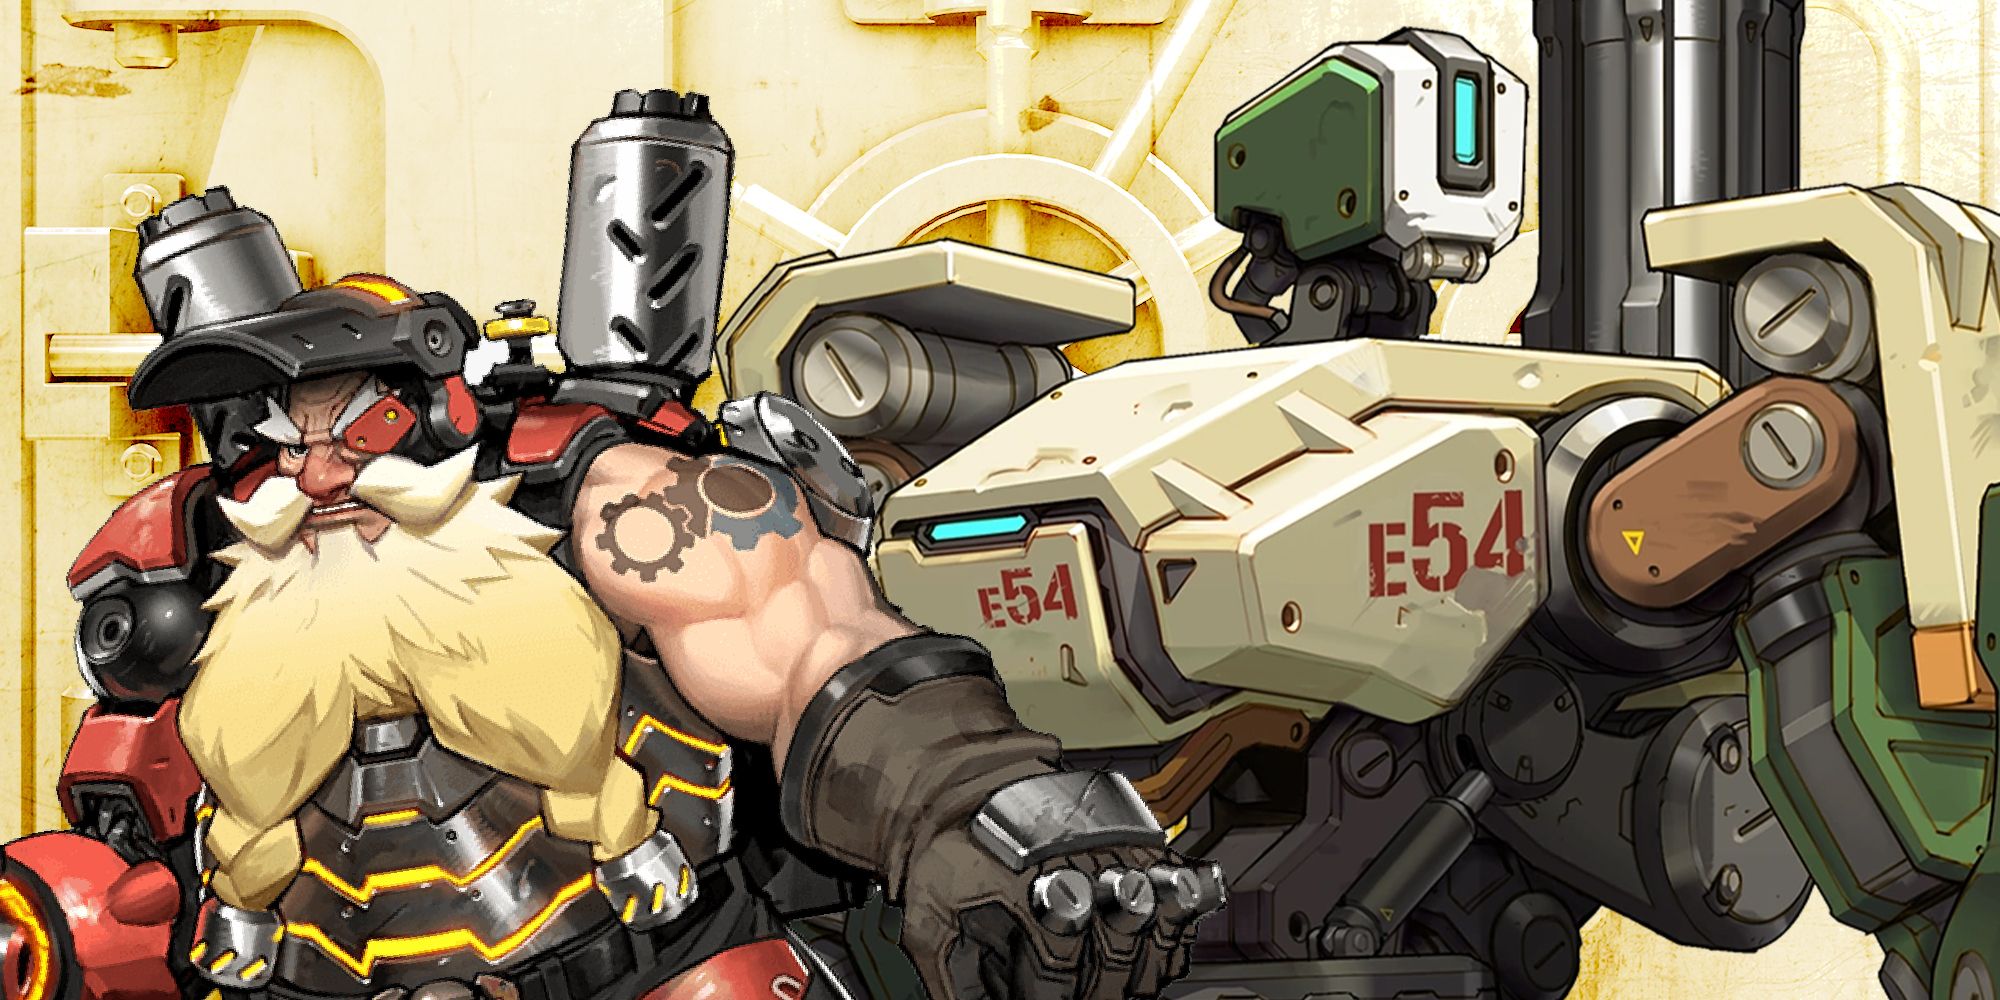 Overwatch Bastion and Torbjorn in the vault